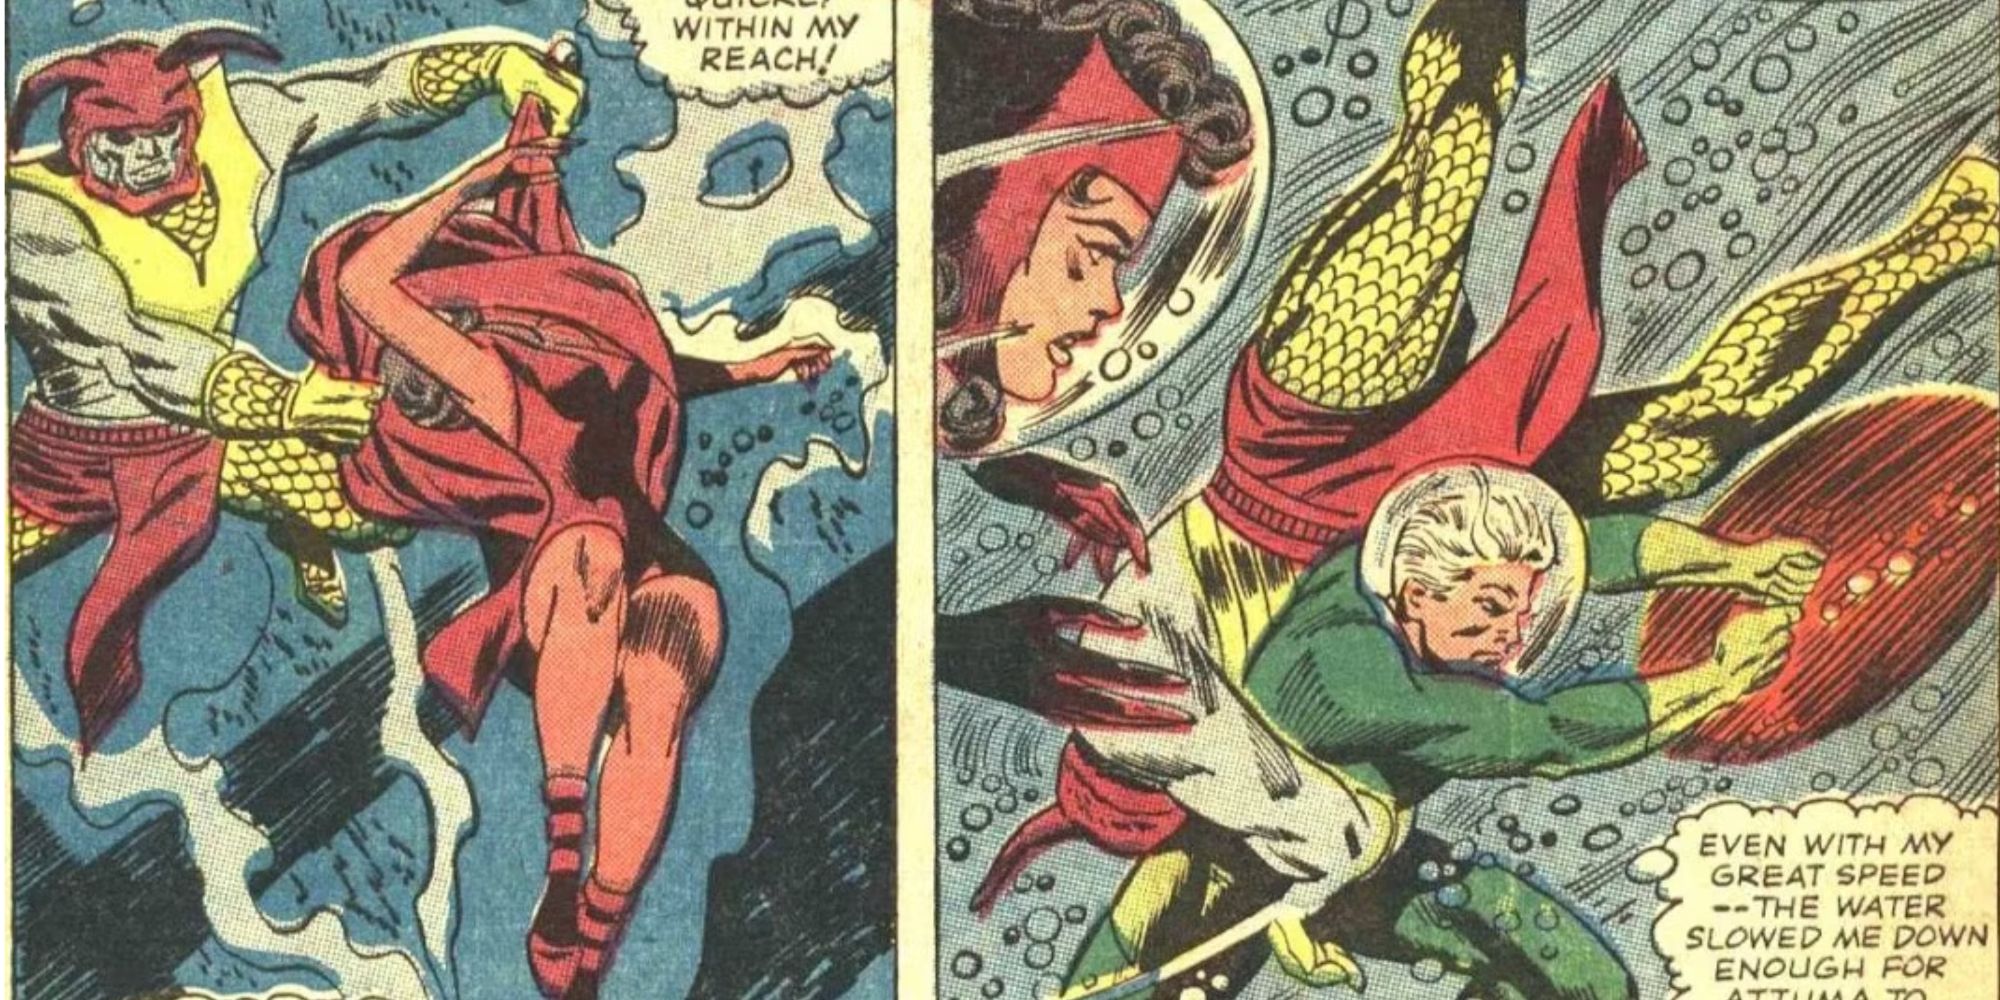 Attuma attacks The Scarlet Witch and Quicksilver in Marvel Comics.